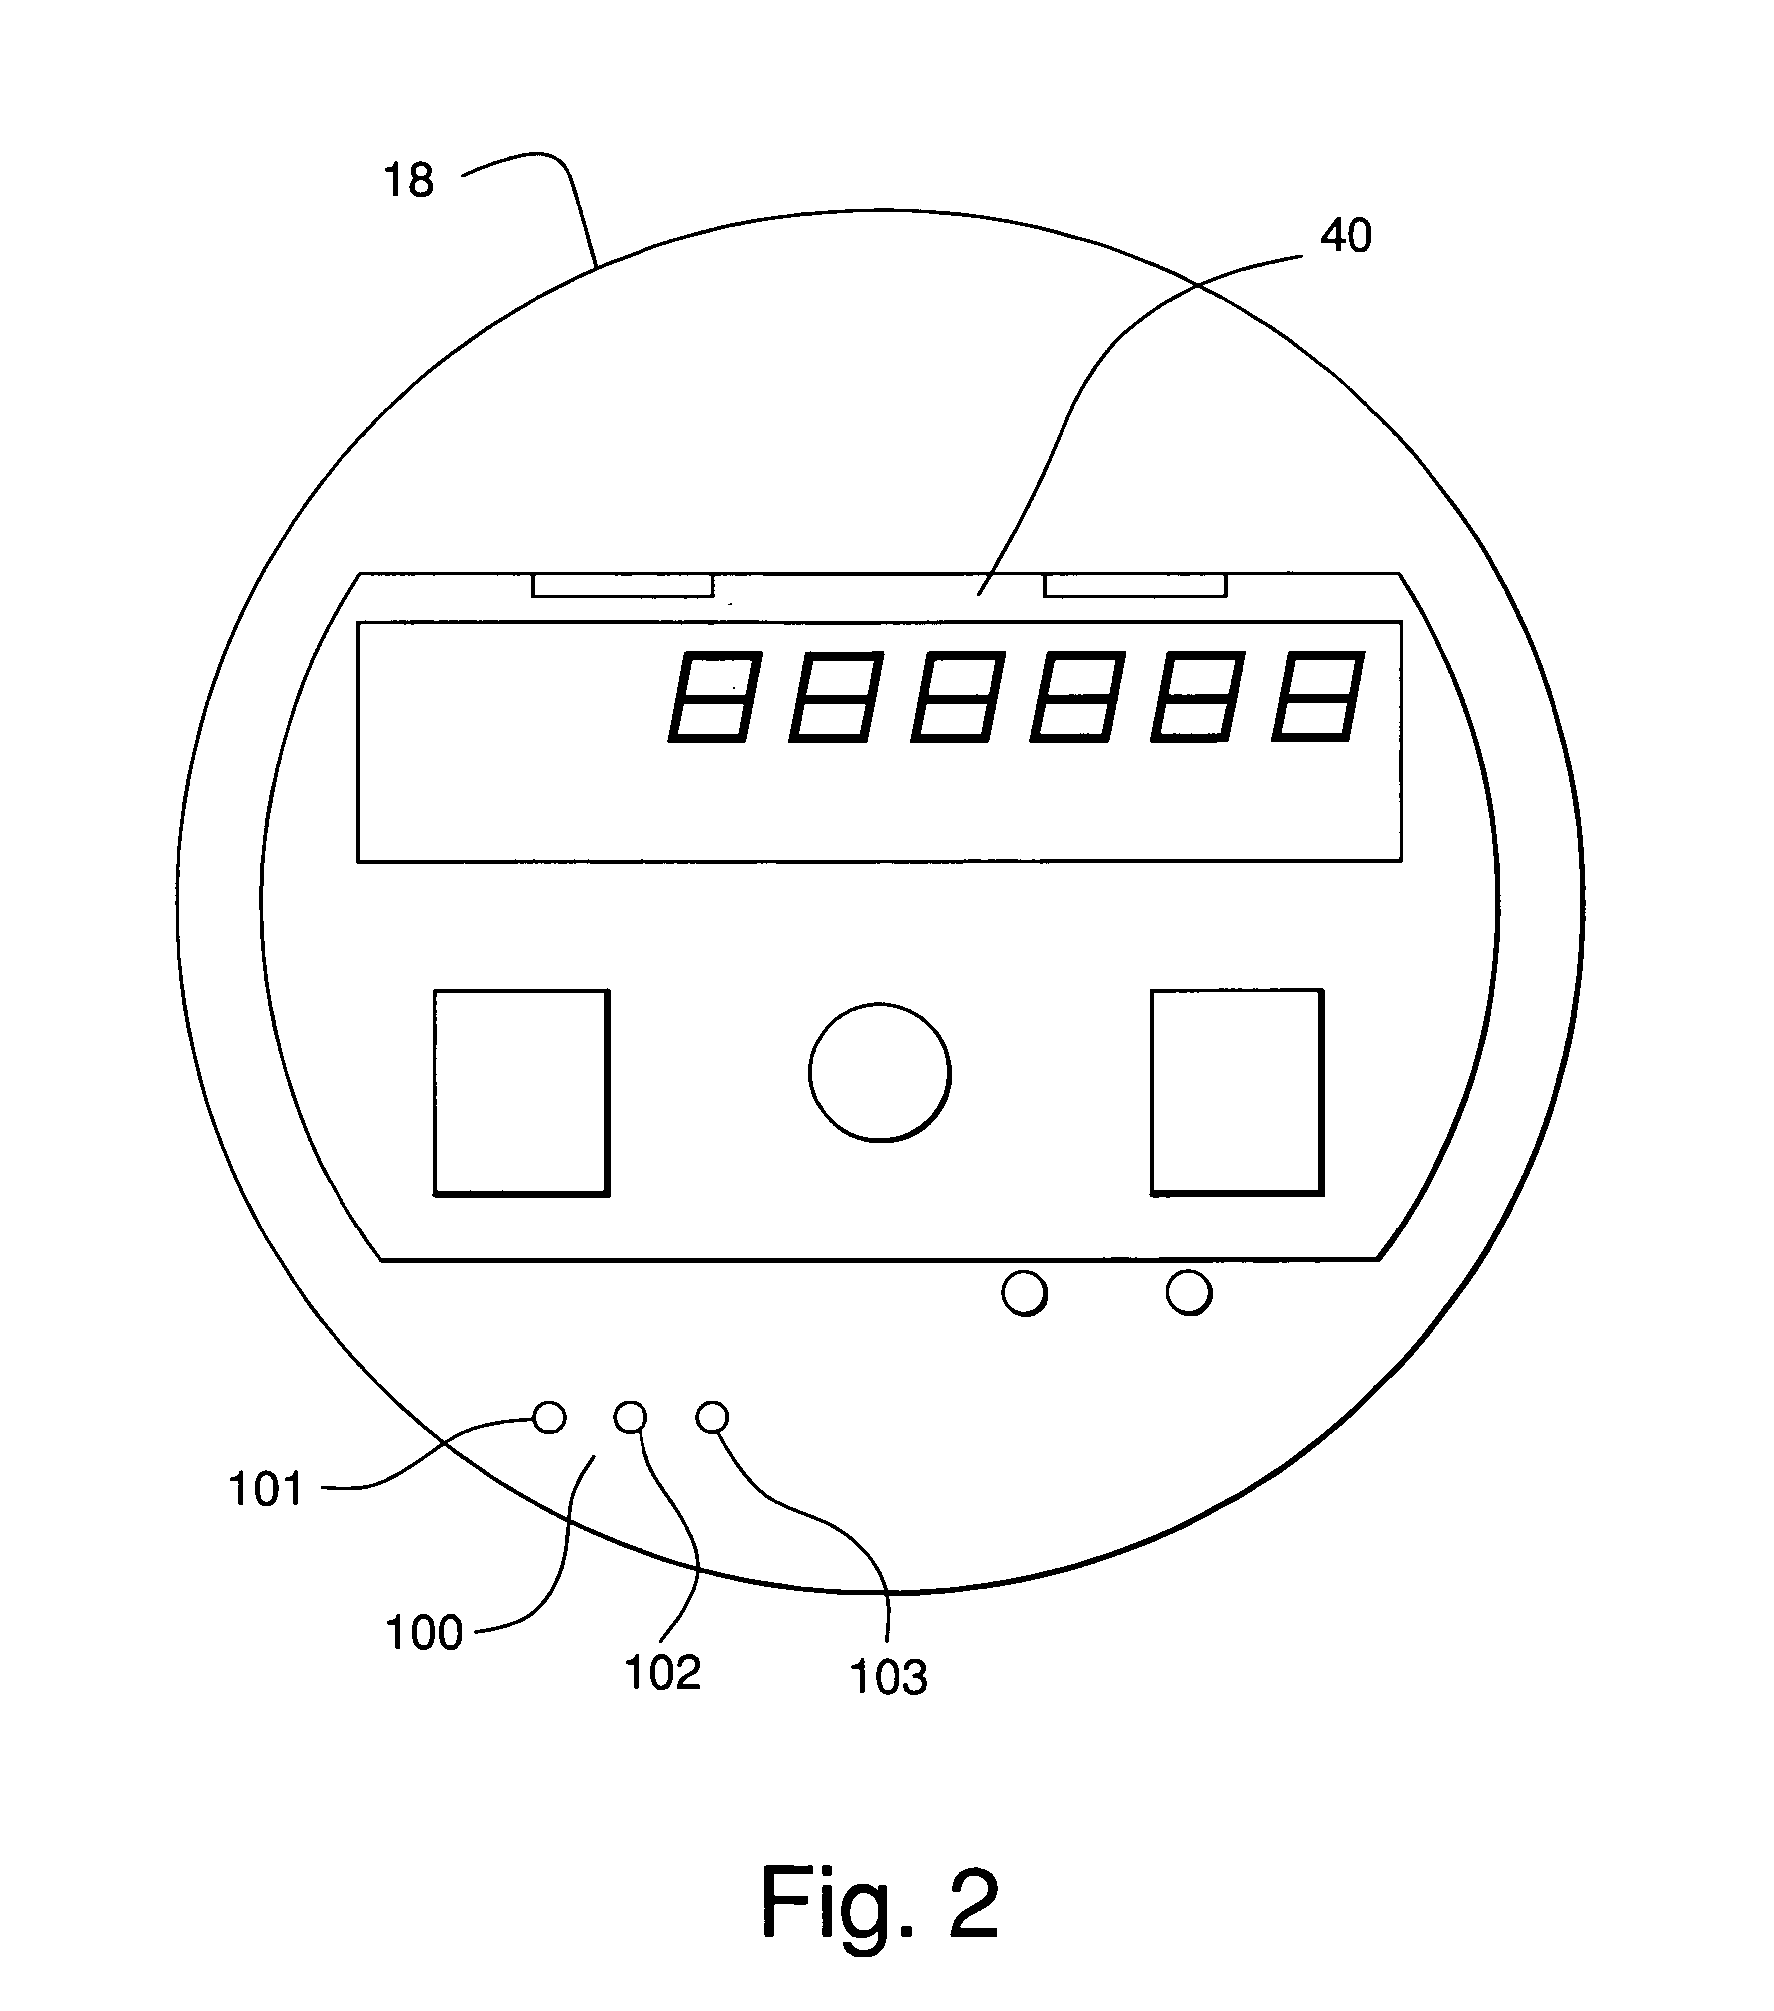 Electrical-energy meter adaptable for optical communication with various external devices